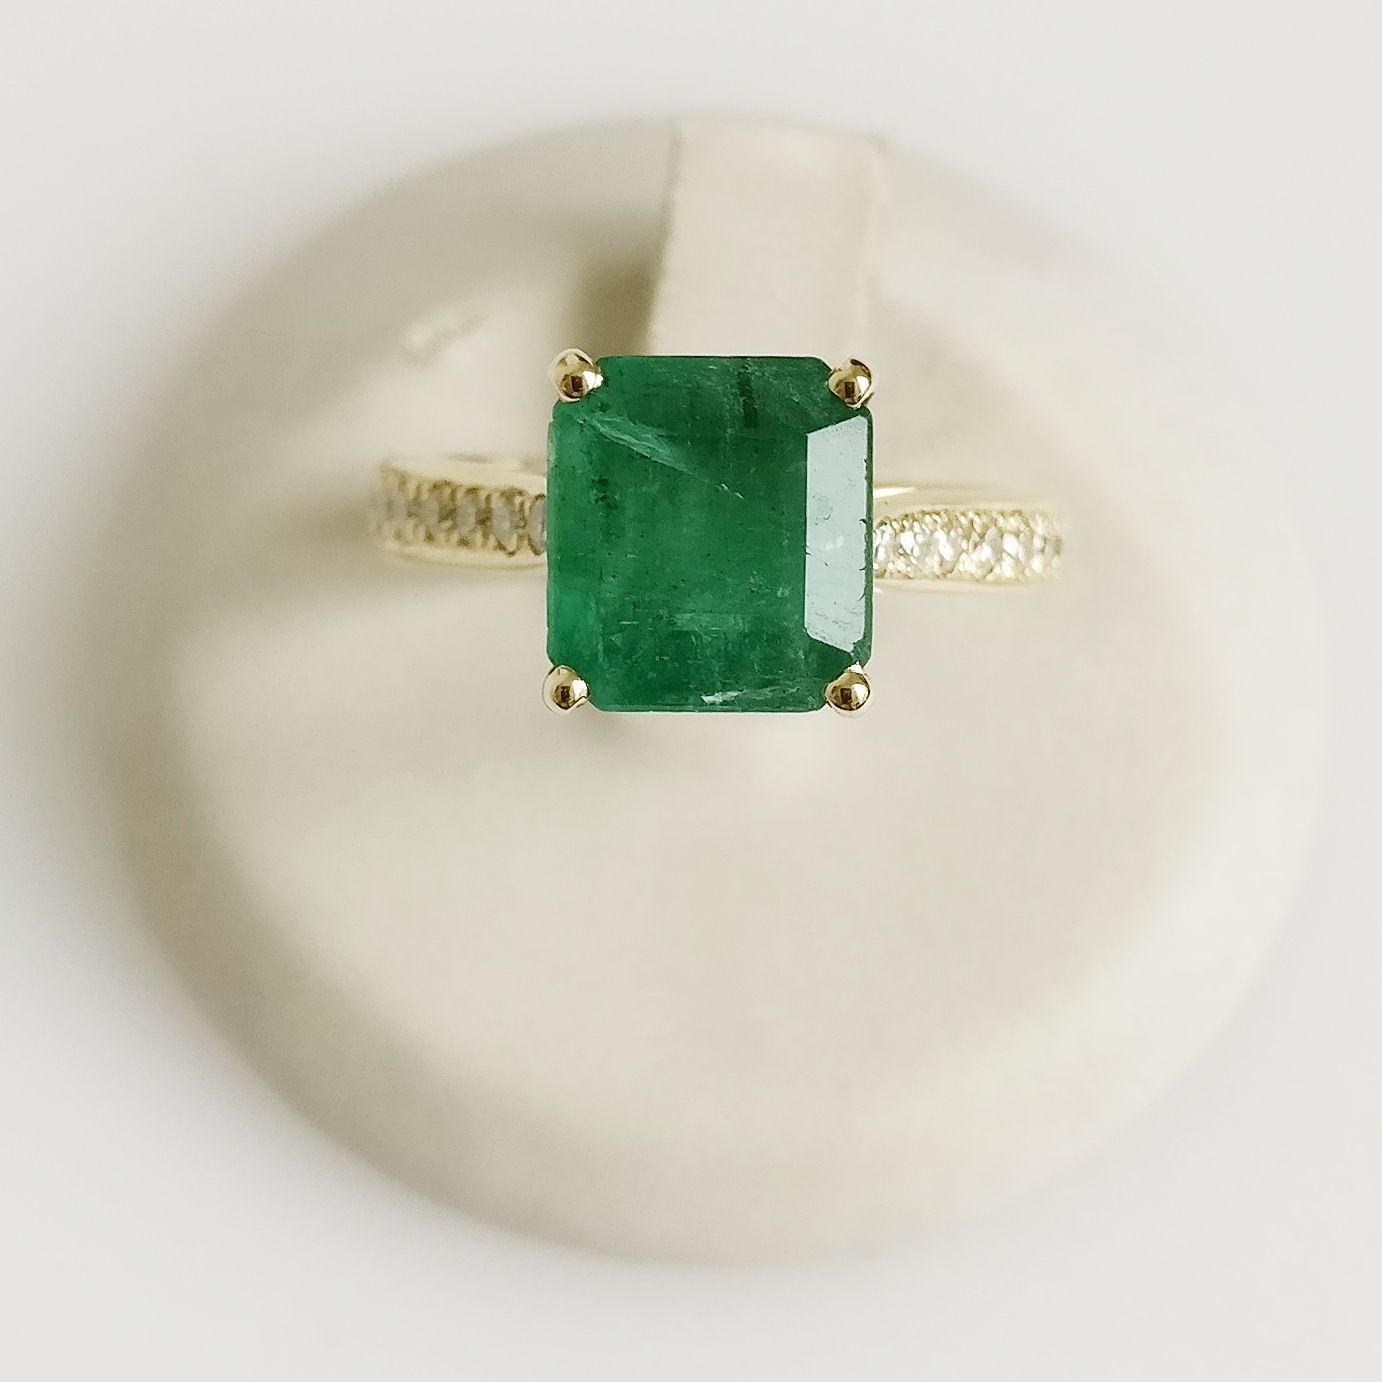 Ring Emerald 4.08ct Emerald and Diamond Ring

Metal: 18 kt. Yellow Gold
Weight: &hellip;